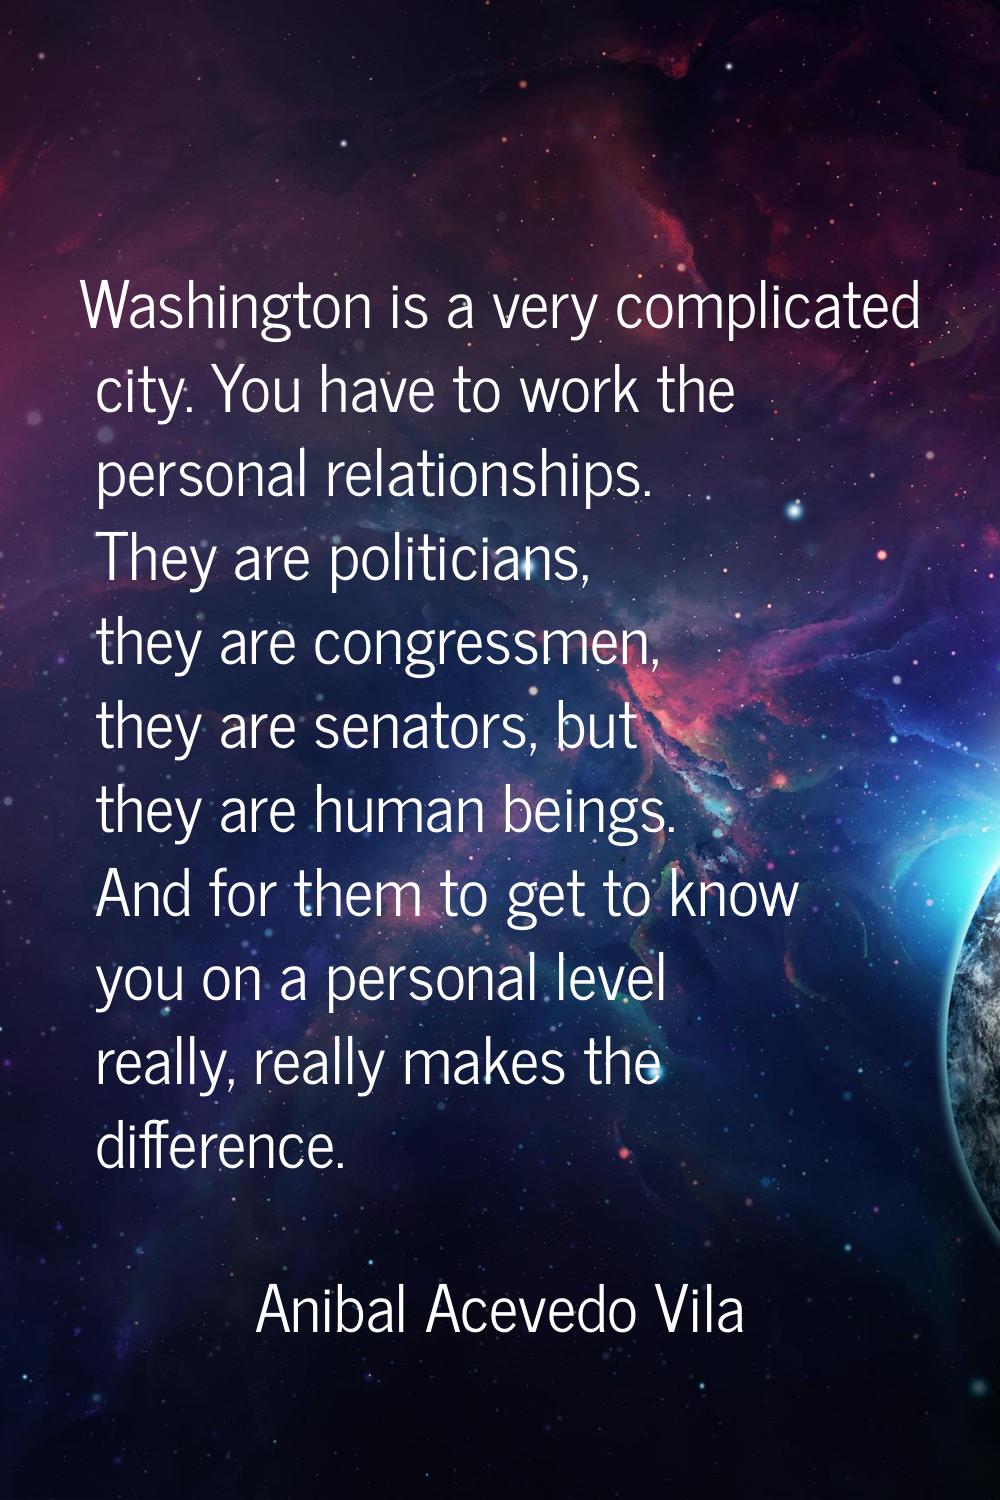 Washington is a very complicated city. You have to work the personal relationships. They are politi